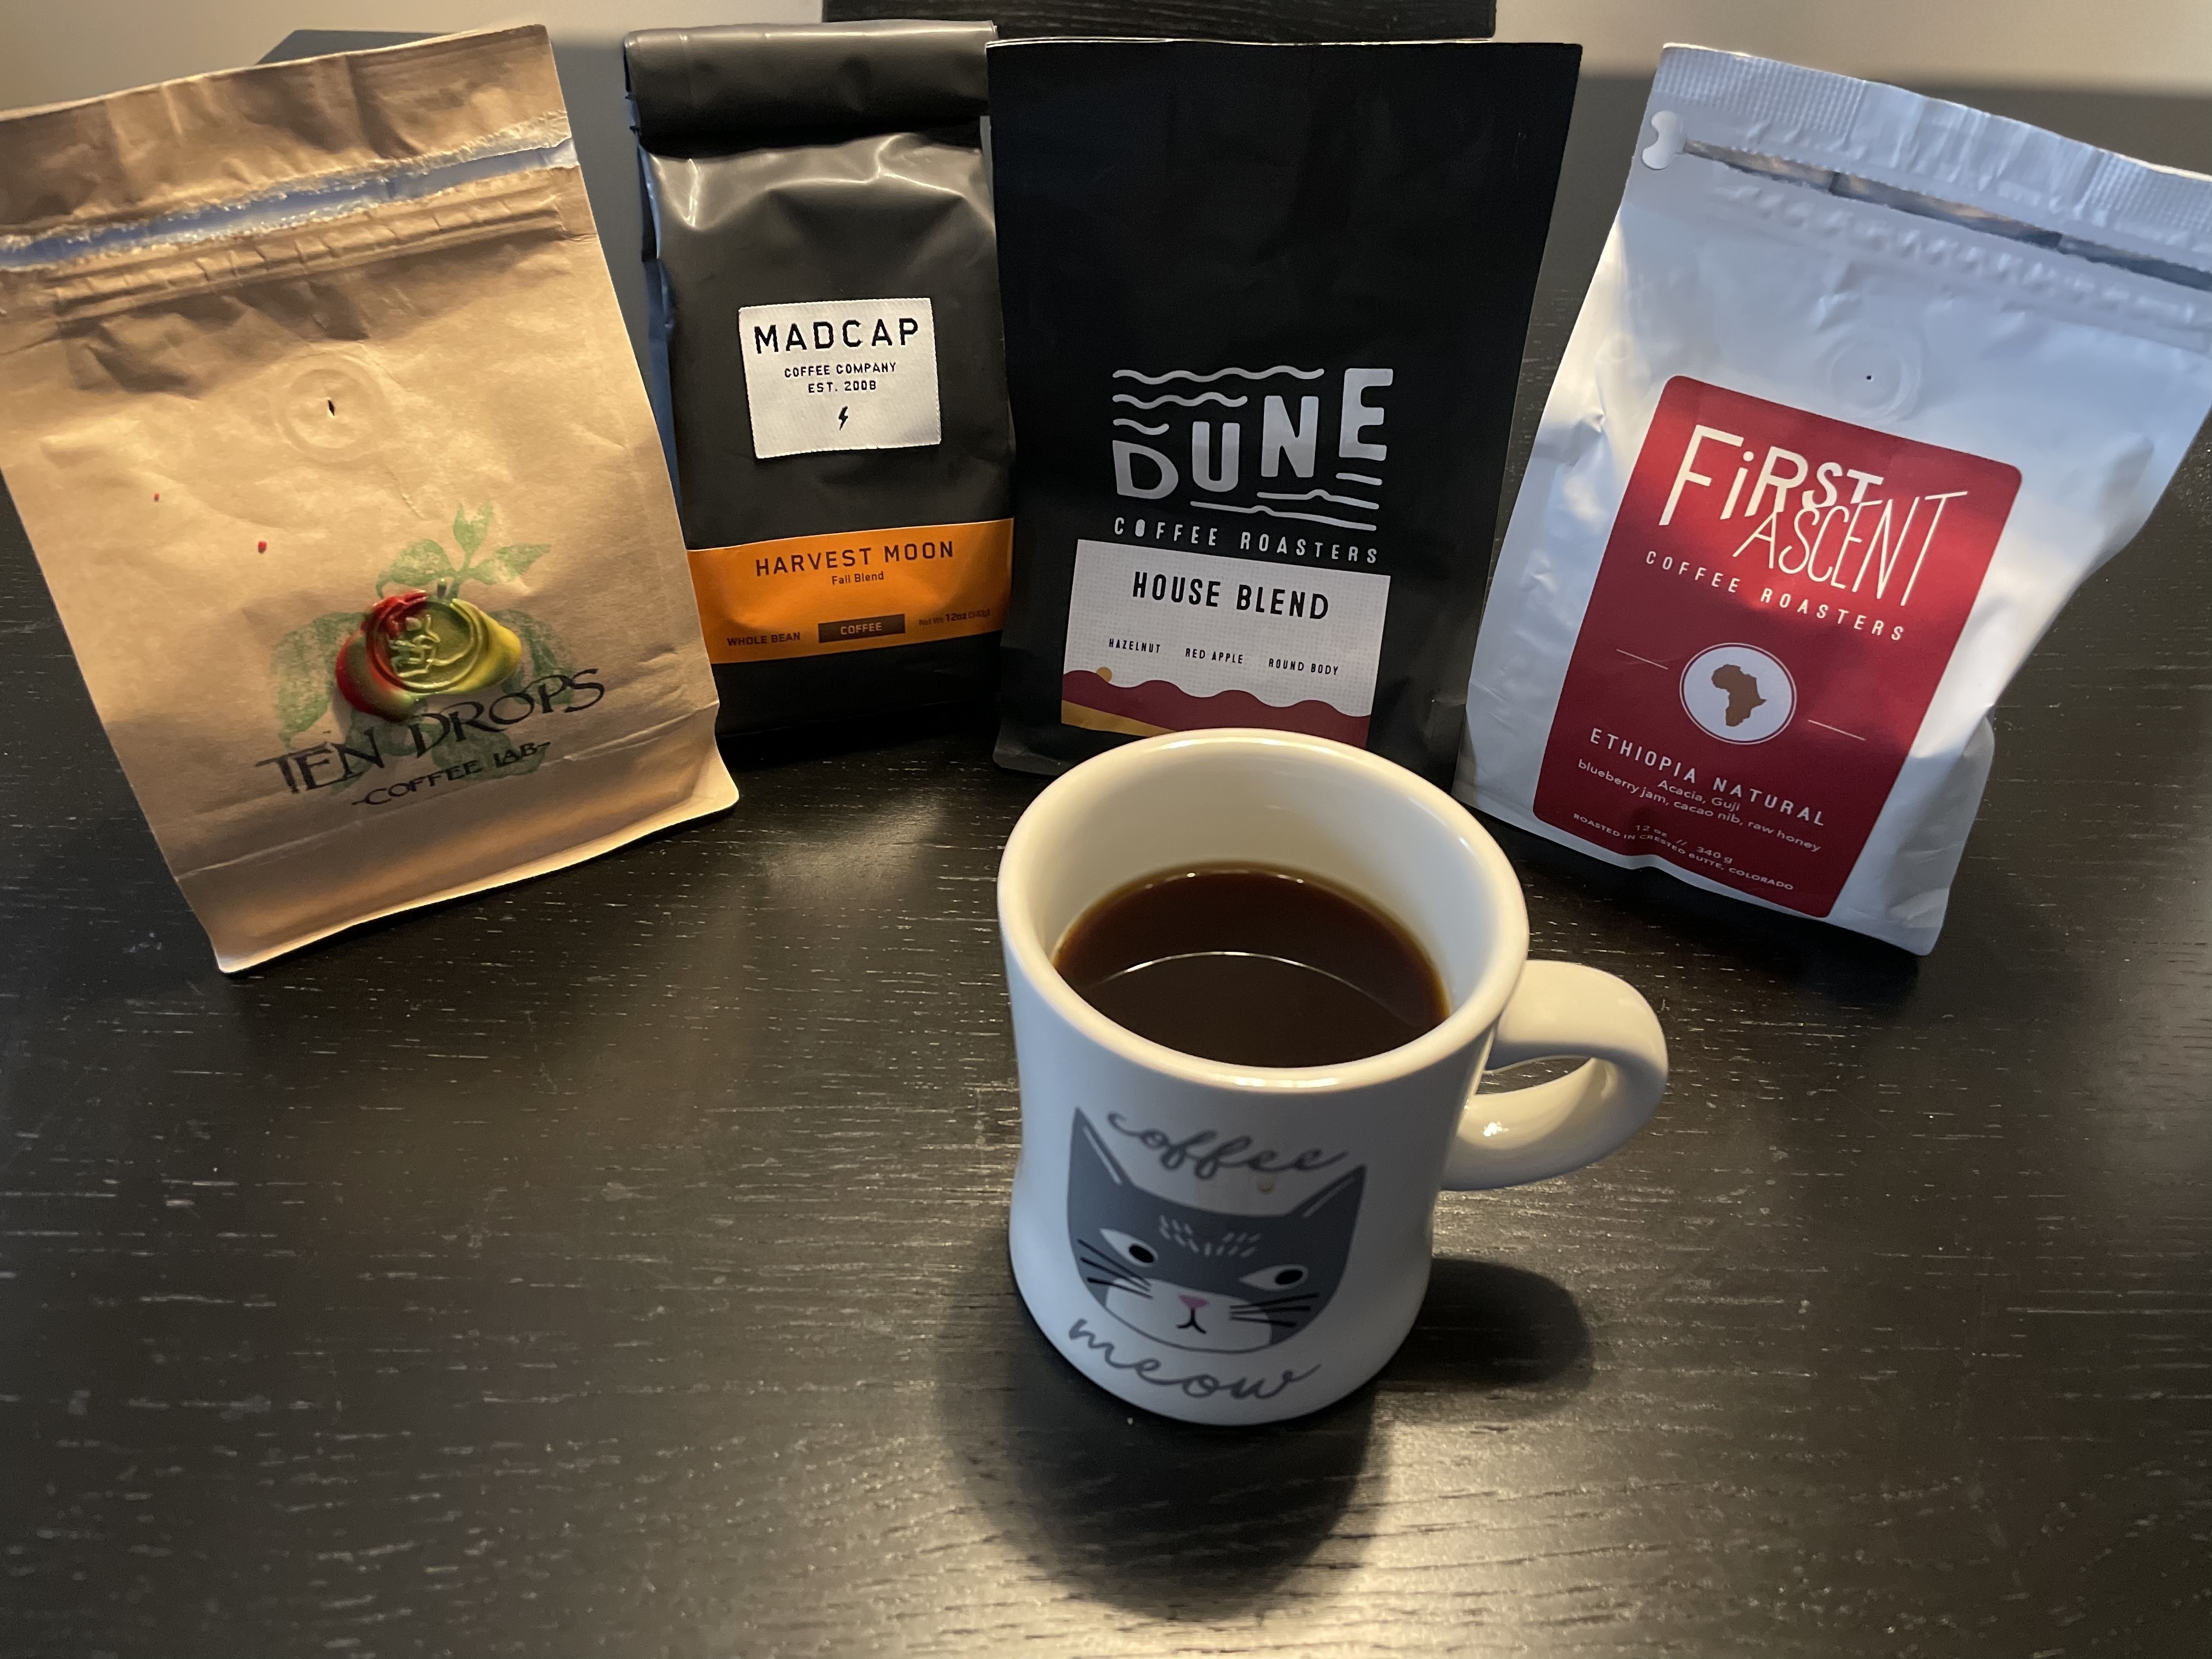 Four bags of coffee: Ten Drops, Madcap, Dune, and First Ascent